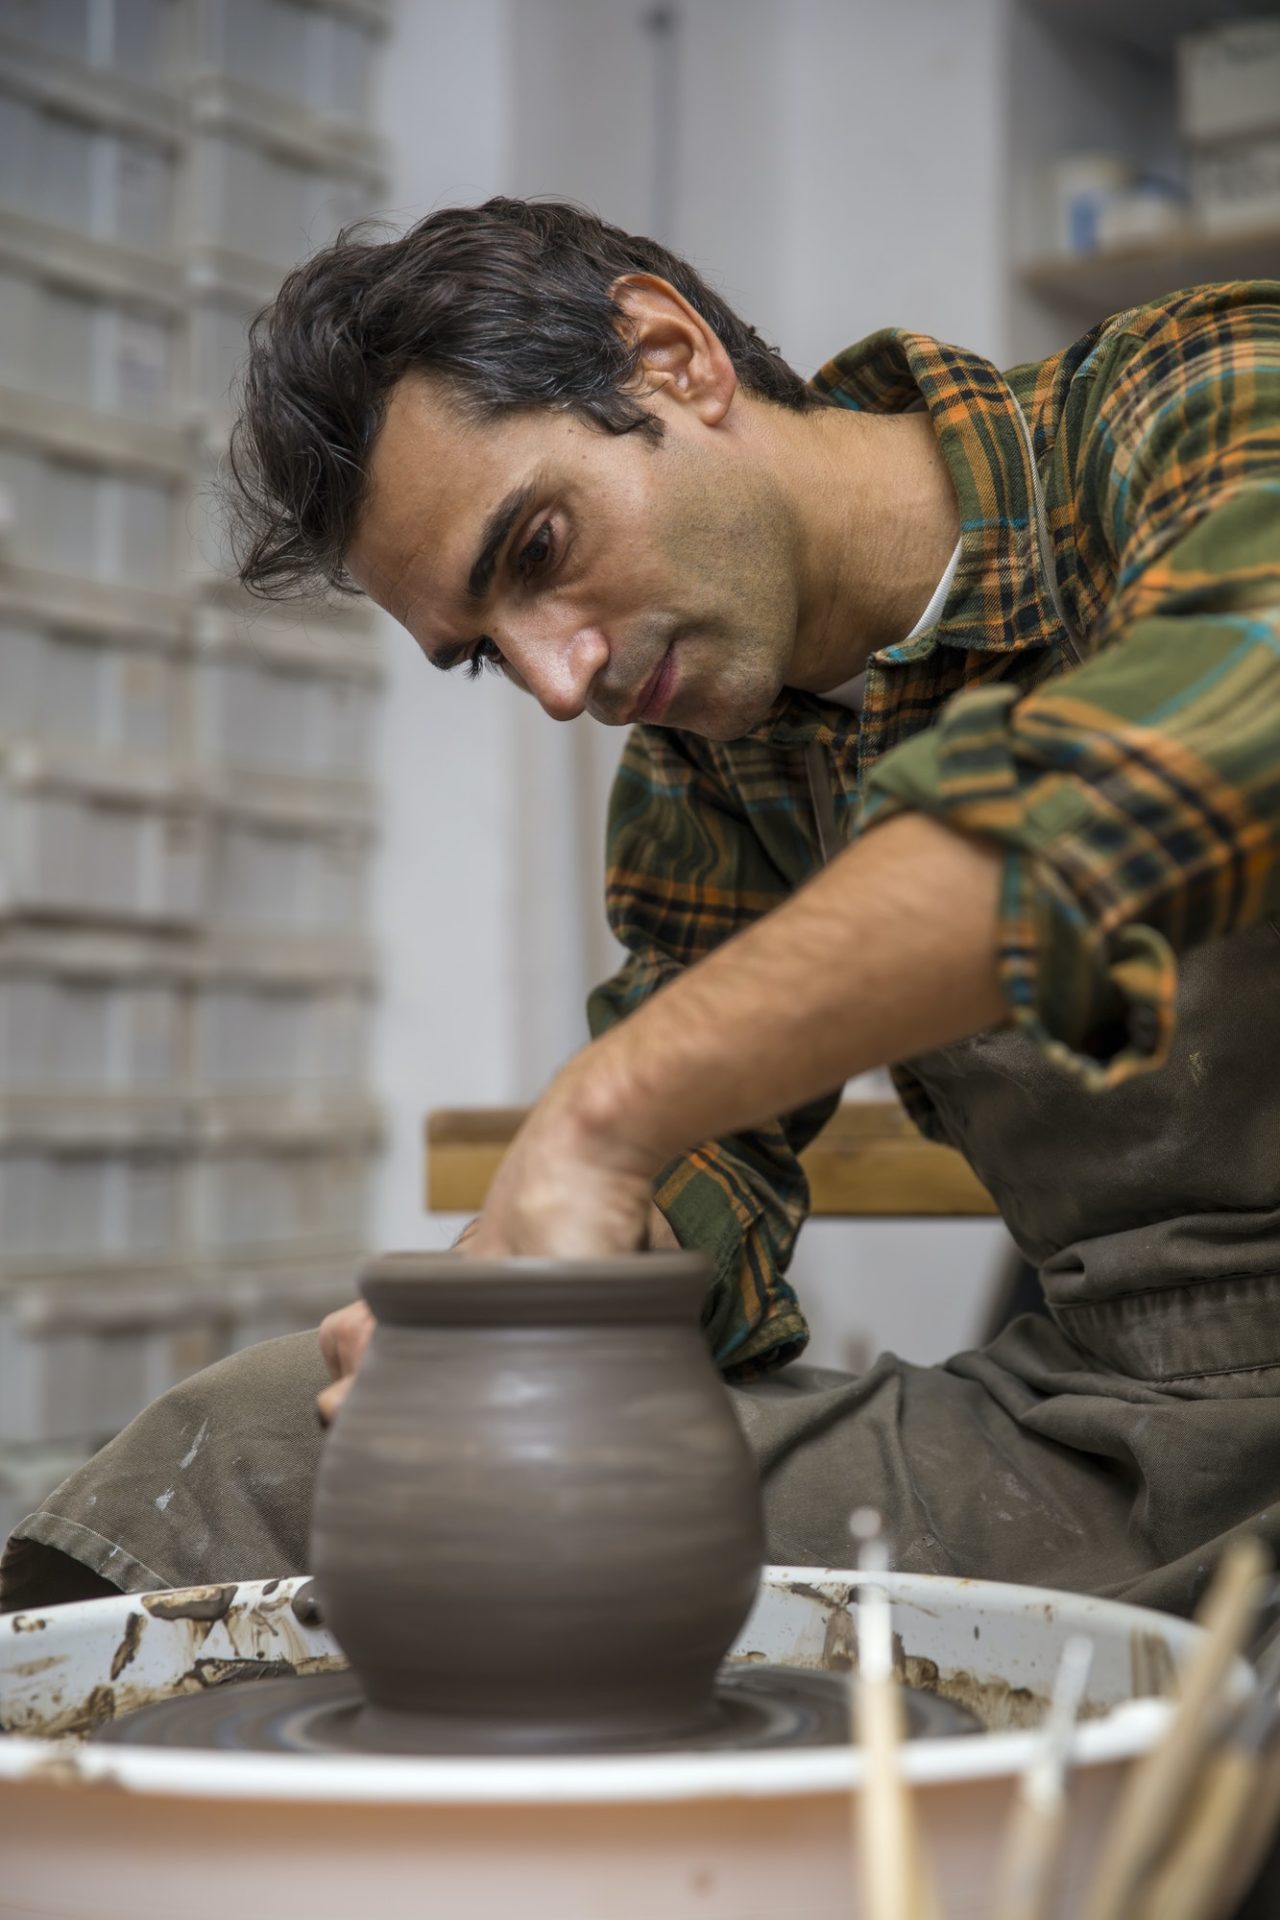 Artist makes clay pottery on a spin wheel in workshop